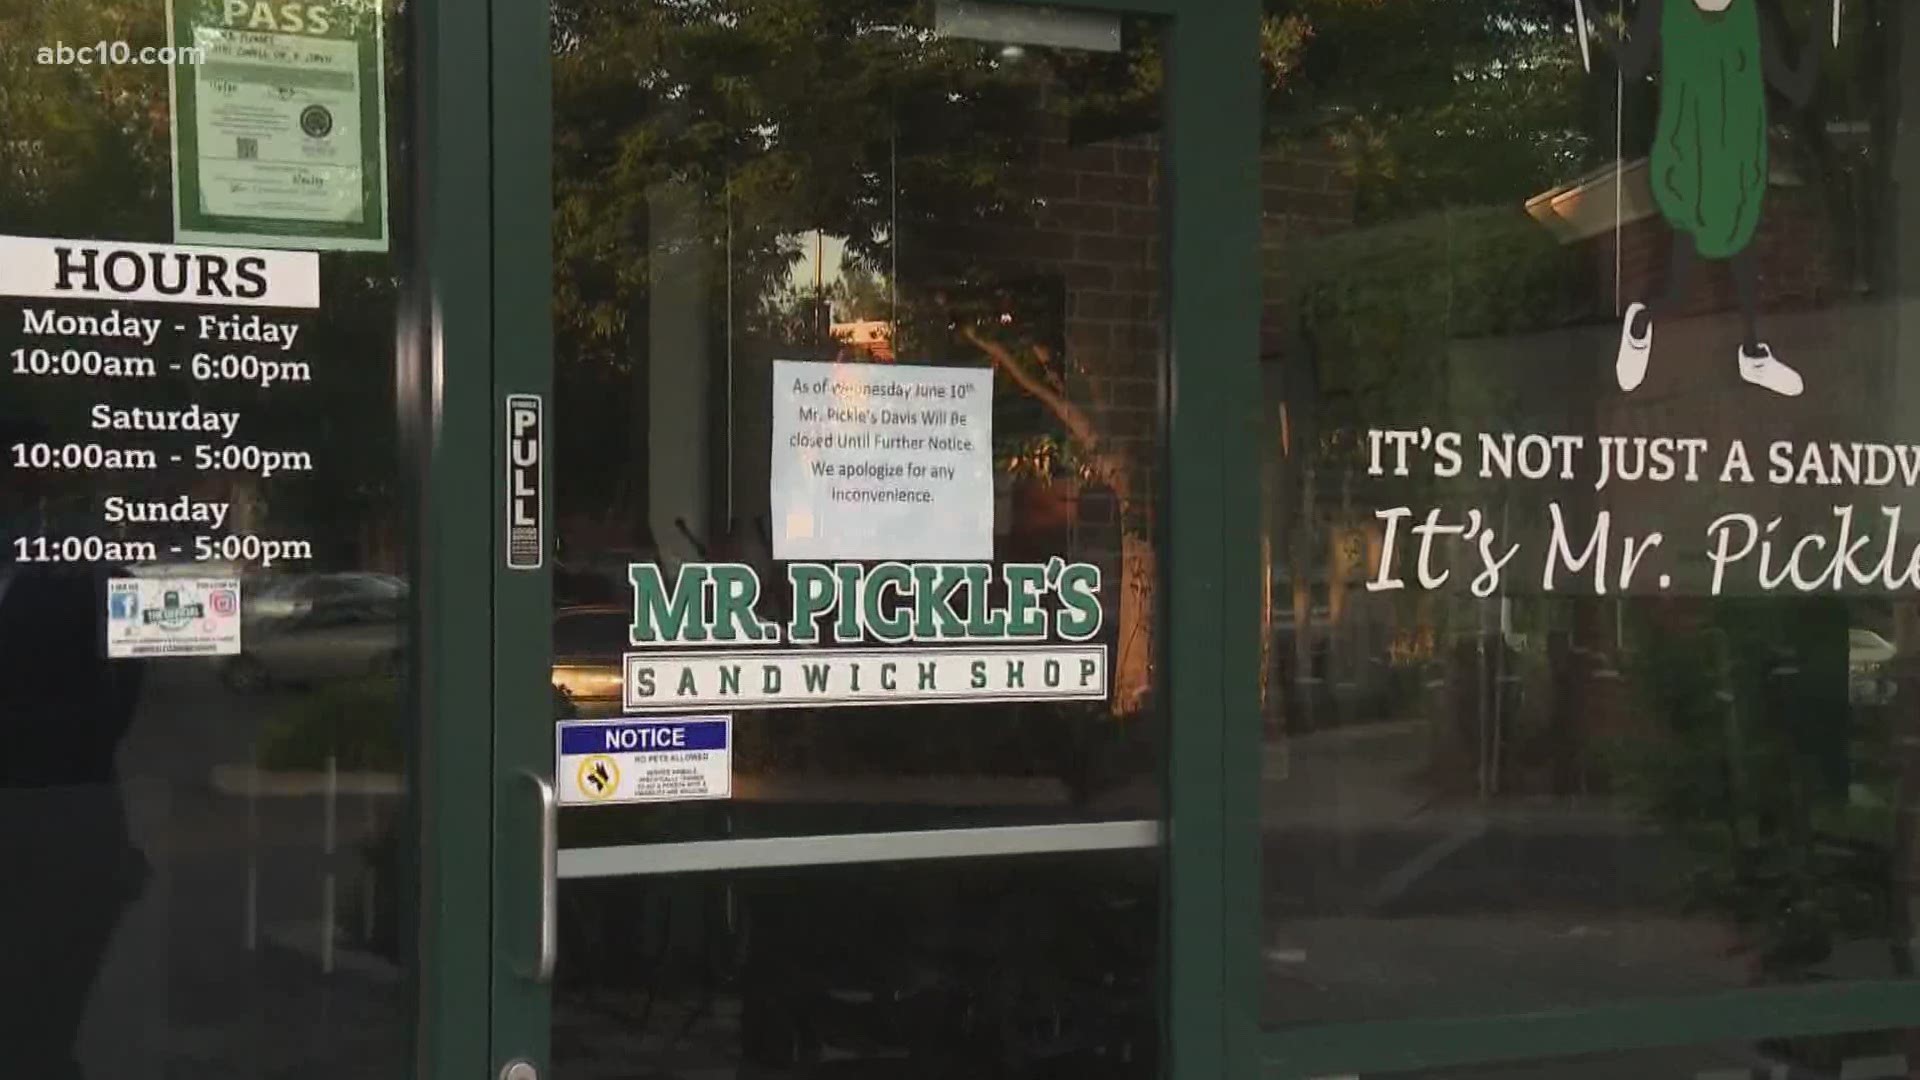 A sandwich shop in Davis abruptly closed after the owner criticized Black Lives Matter as an organization and likened it as a flip side to the Ku Klux Klan.